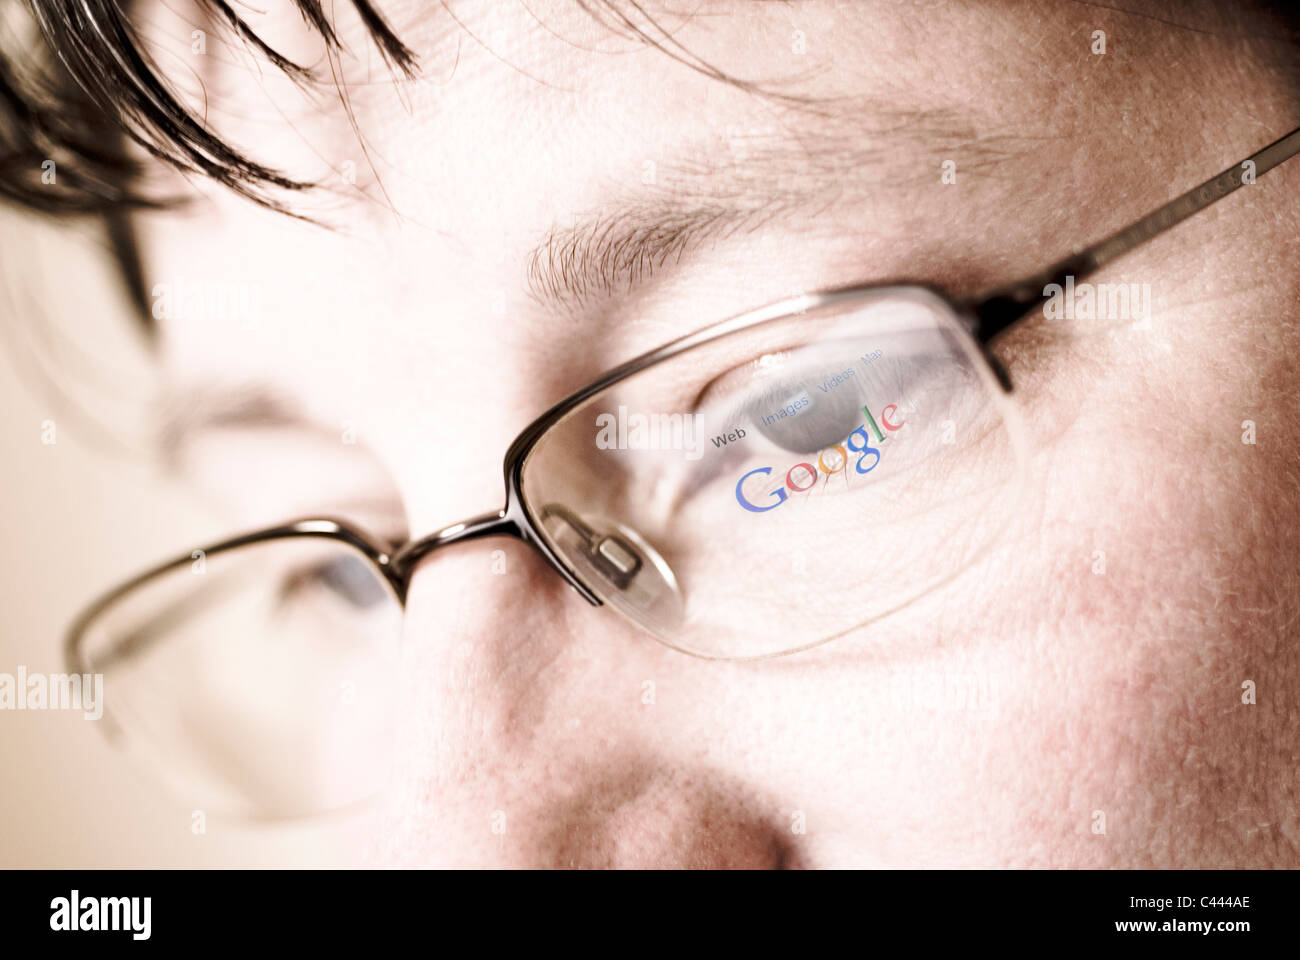 Reflection of search engine Google logo and web page in glasses. Stock Photo